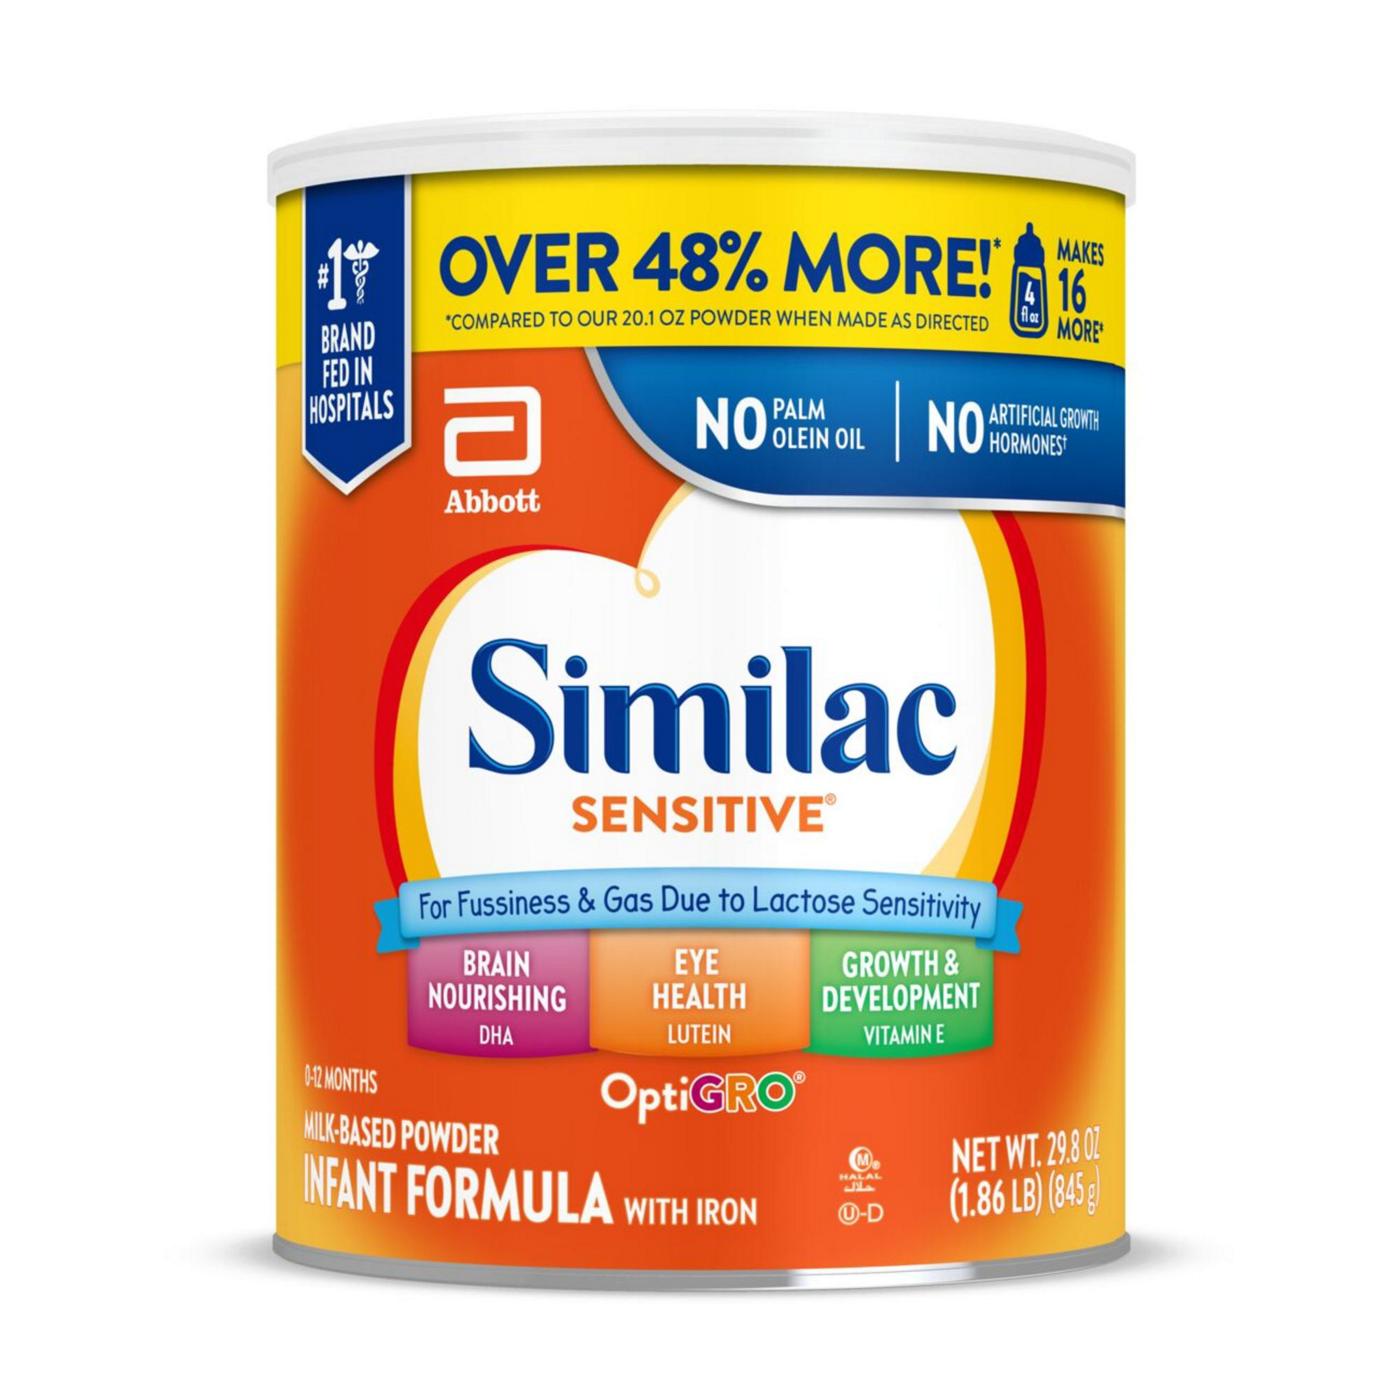 Similac Sensitive For Fussiness and Gas Infant Formula with Iron Powder; image 1 of 2